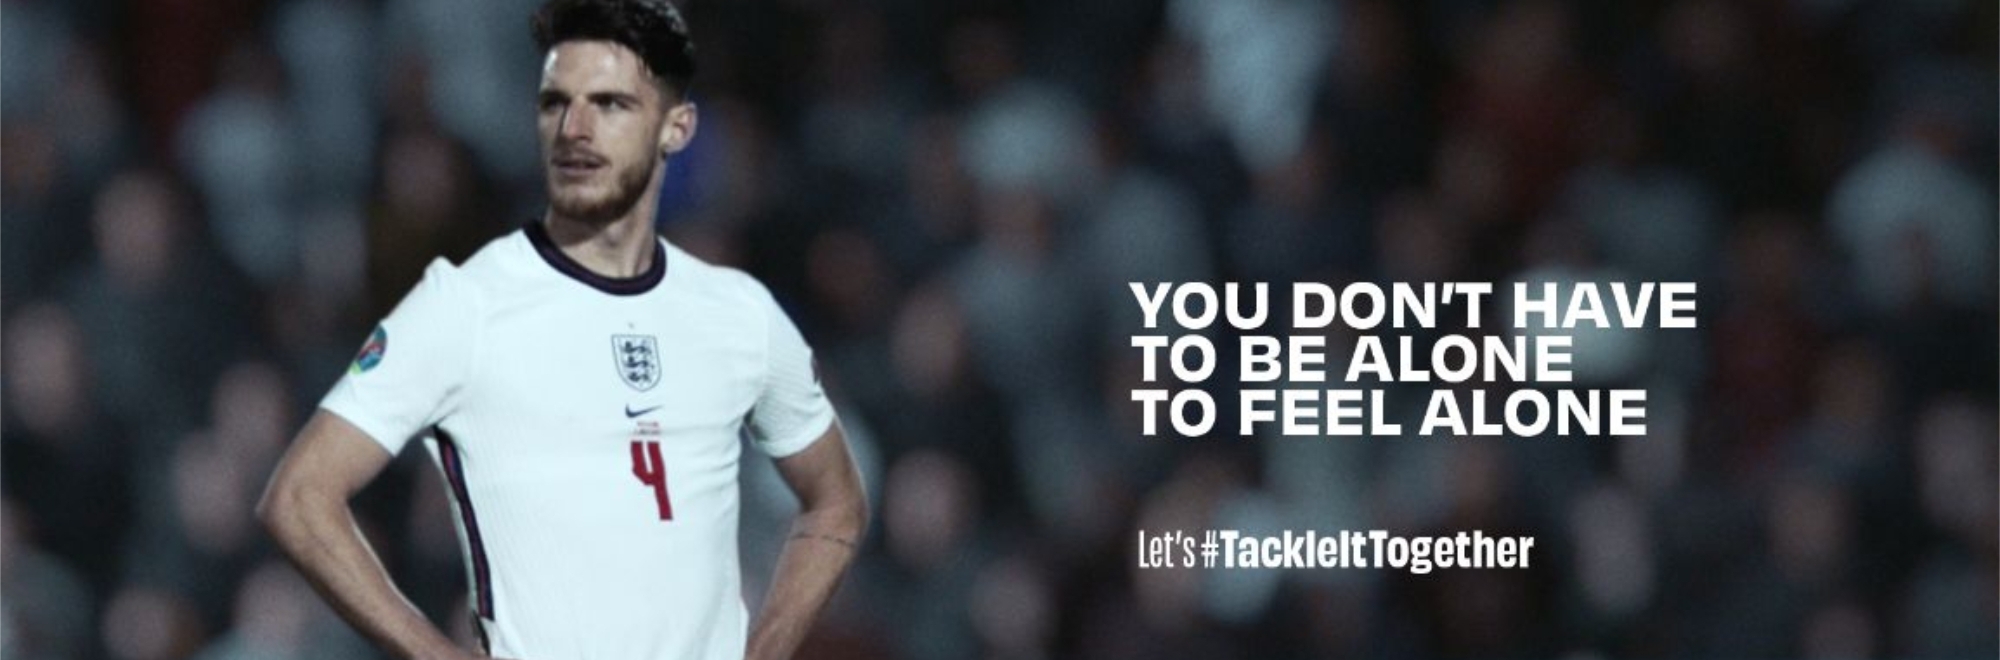 Declan Rice features in new campaign for suicide prevention charity Campaign Against Living Miserably